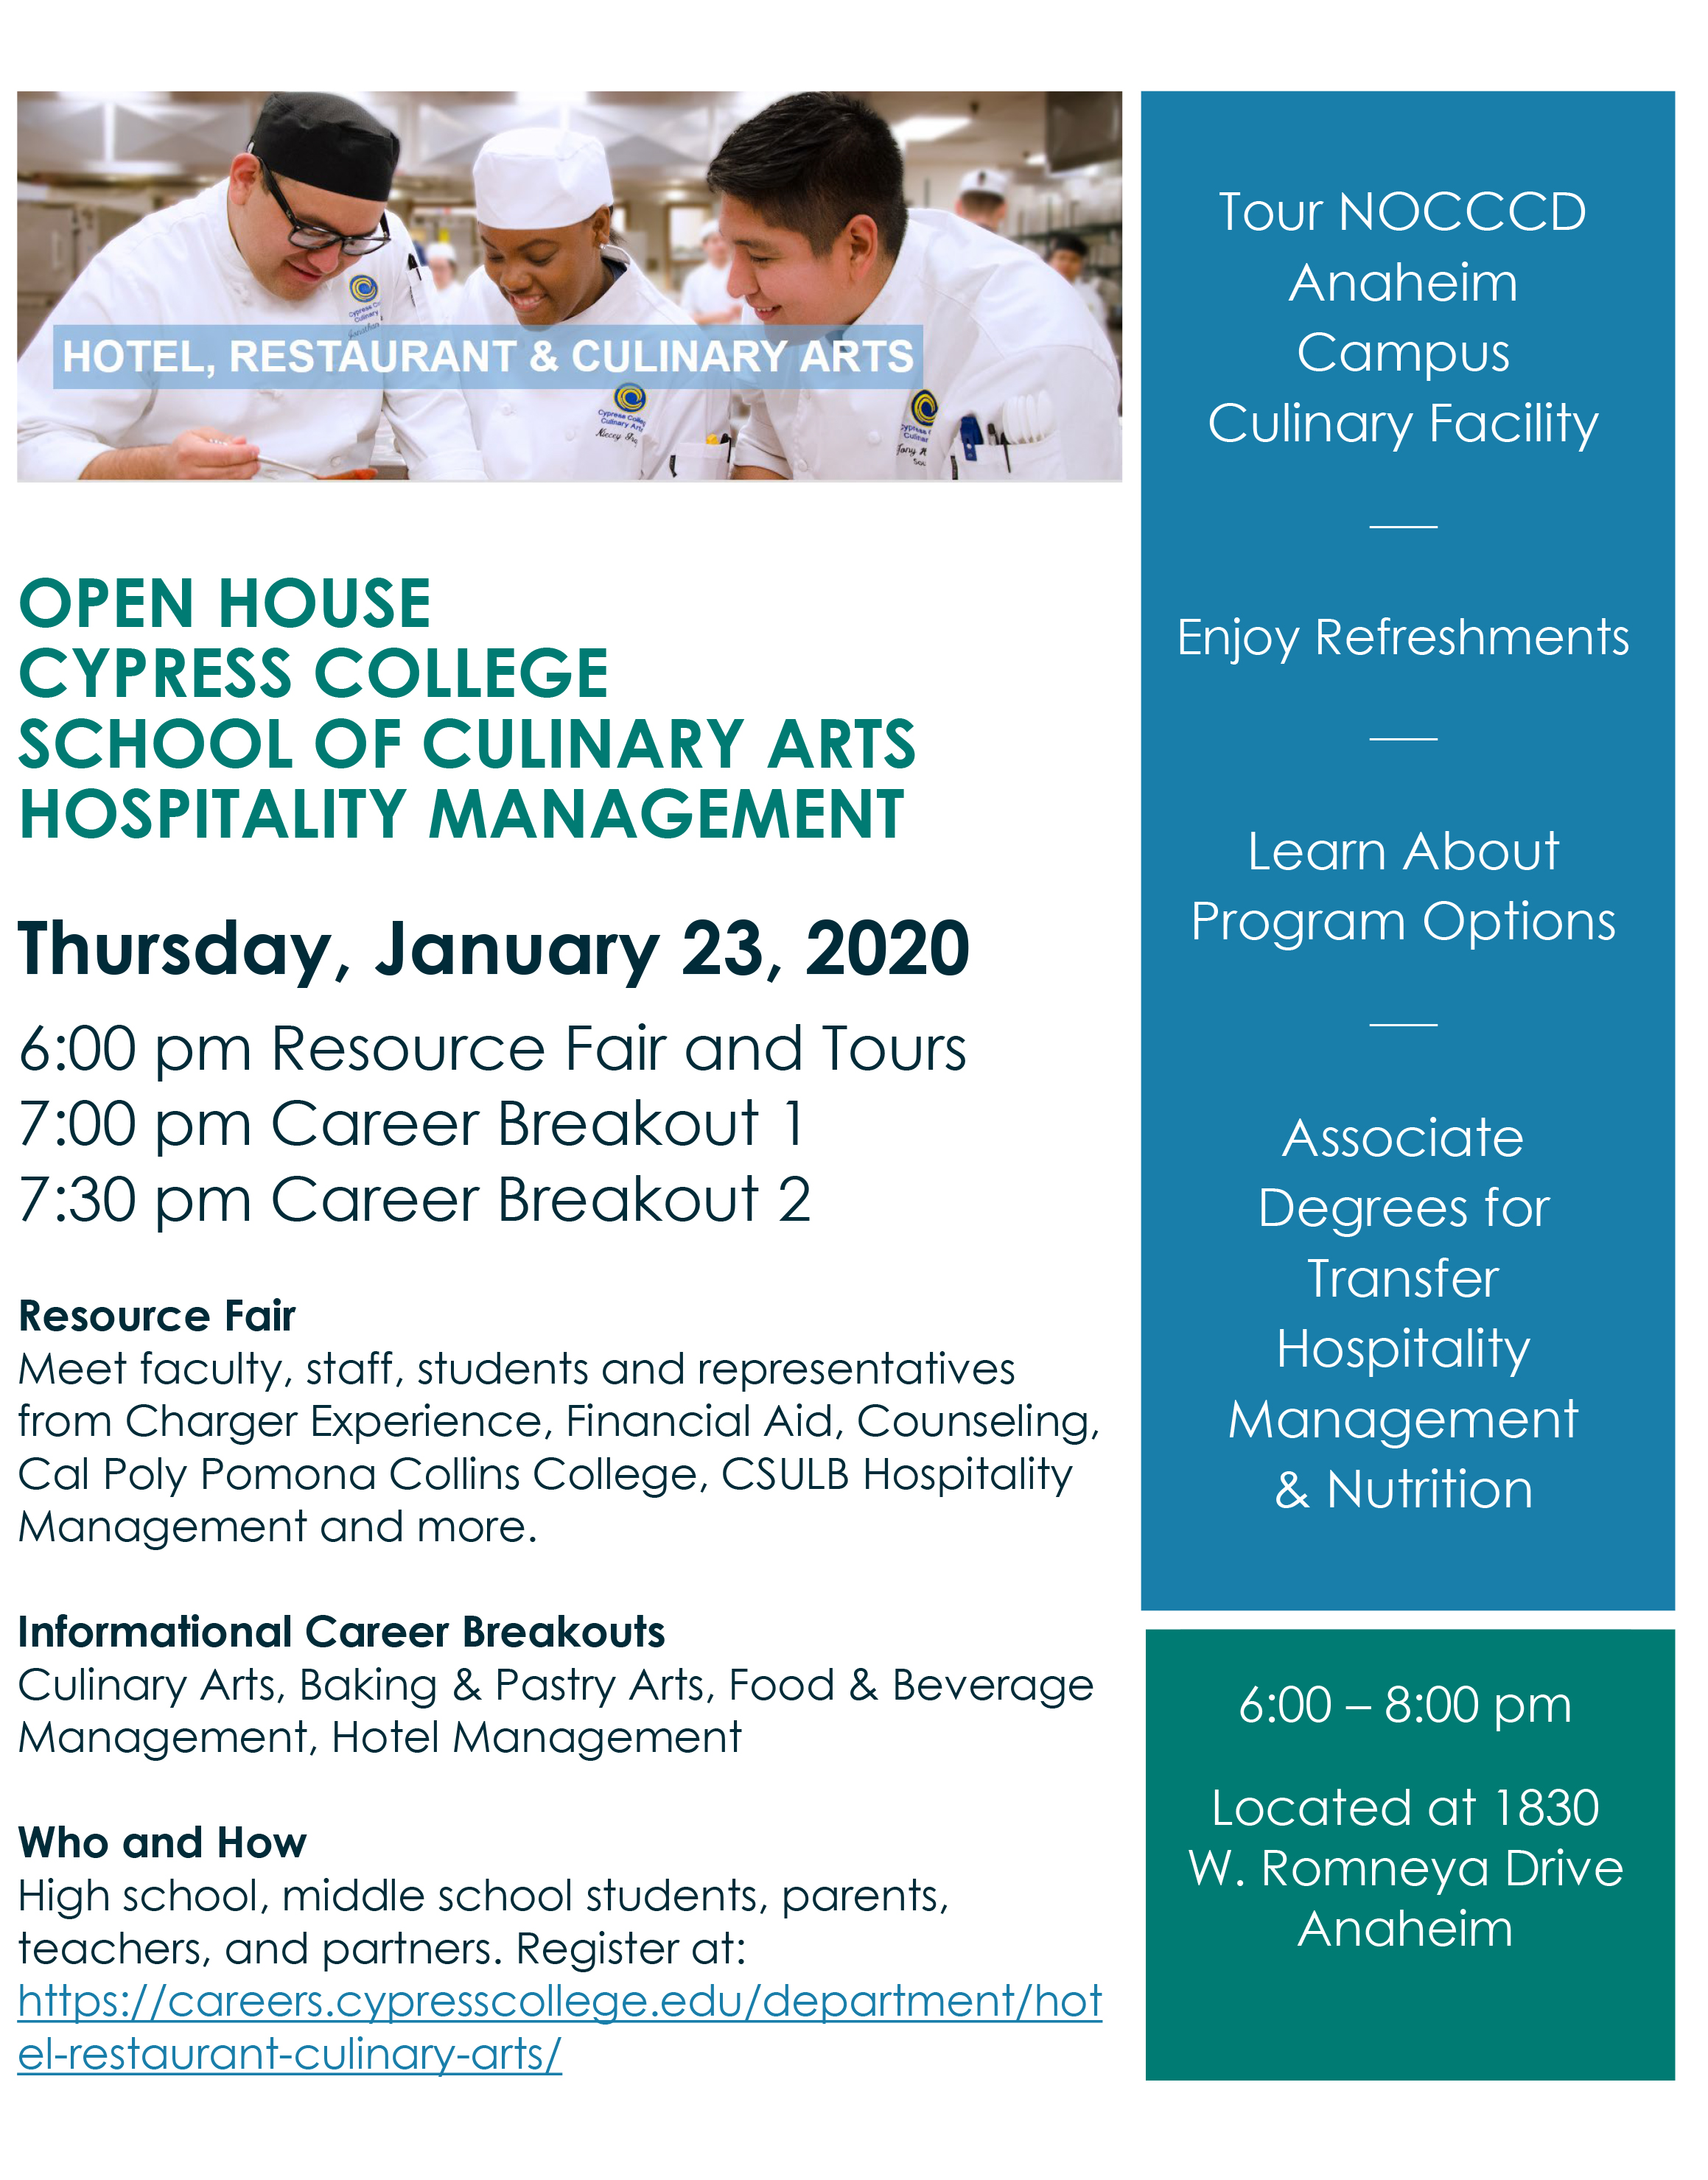 School of Culinary Arts Hospitality Management Open House flyer